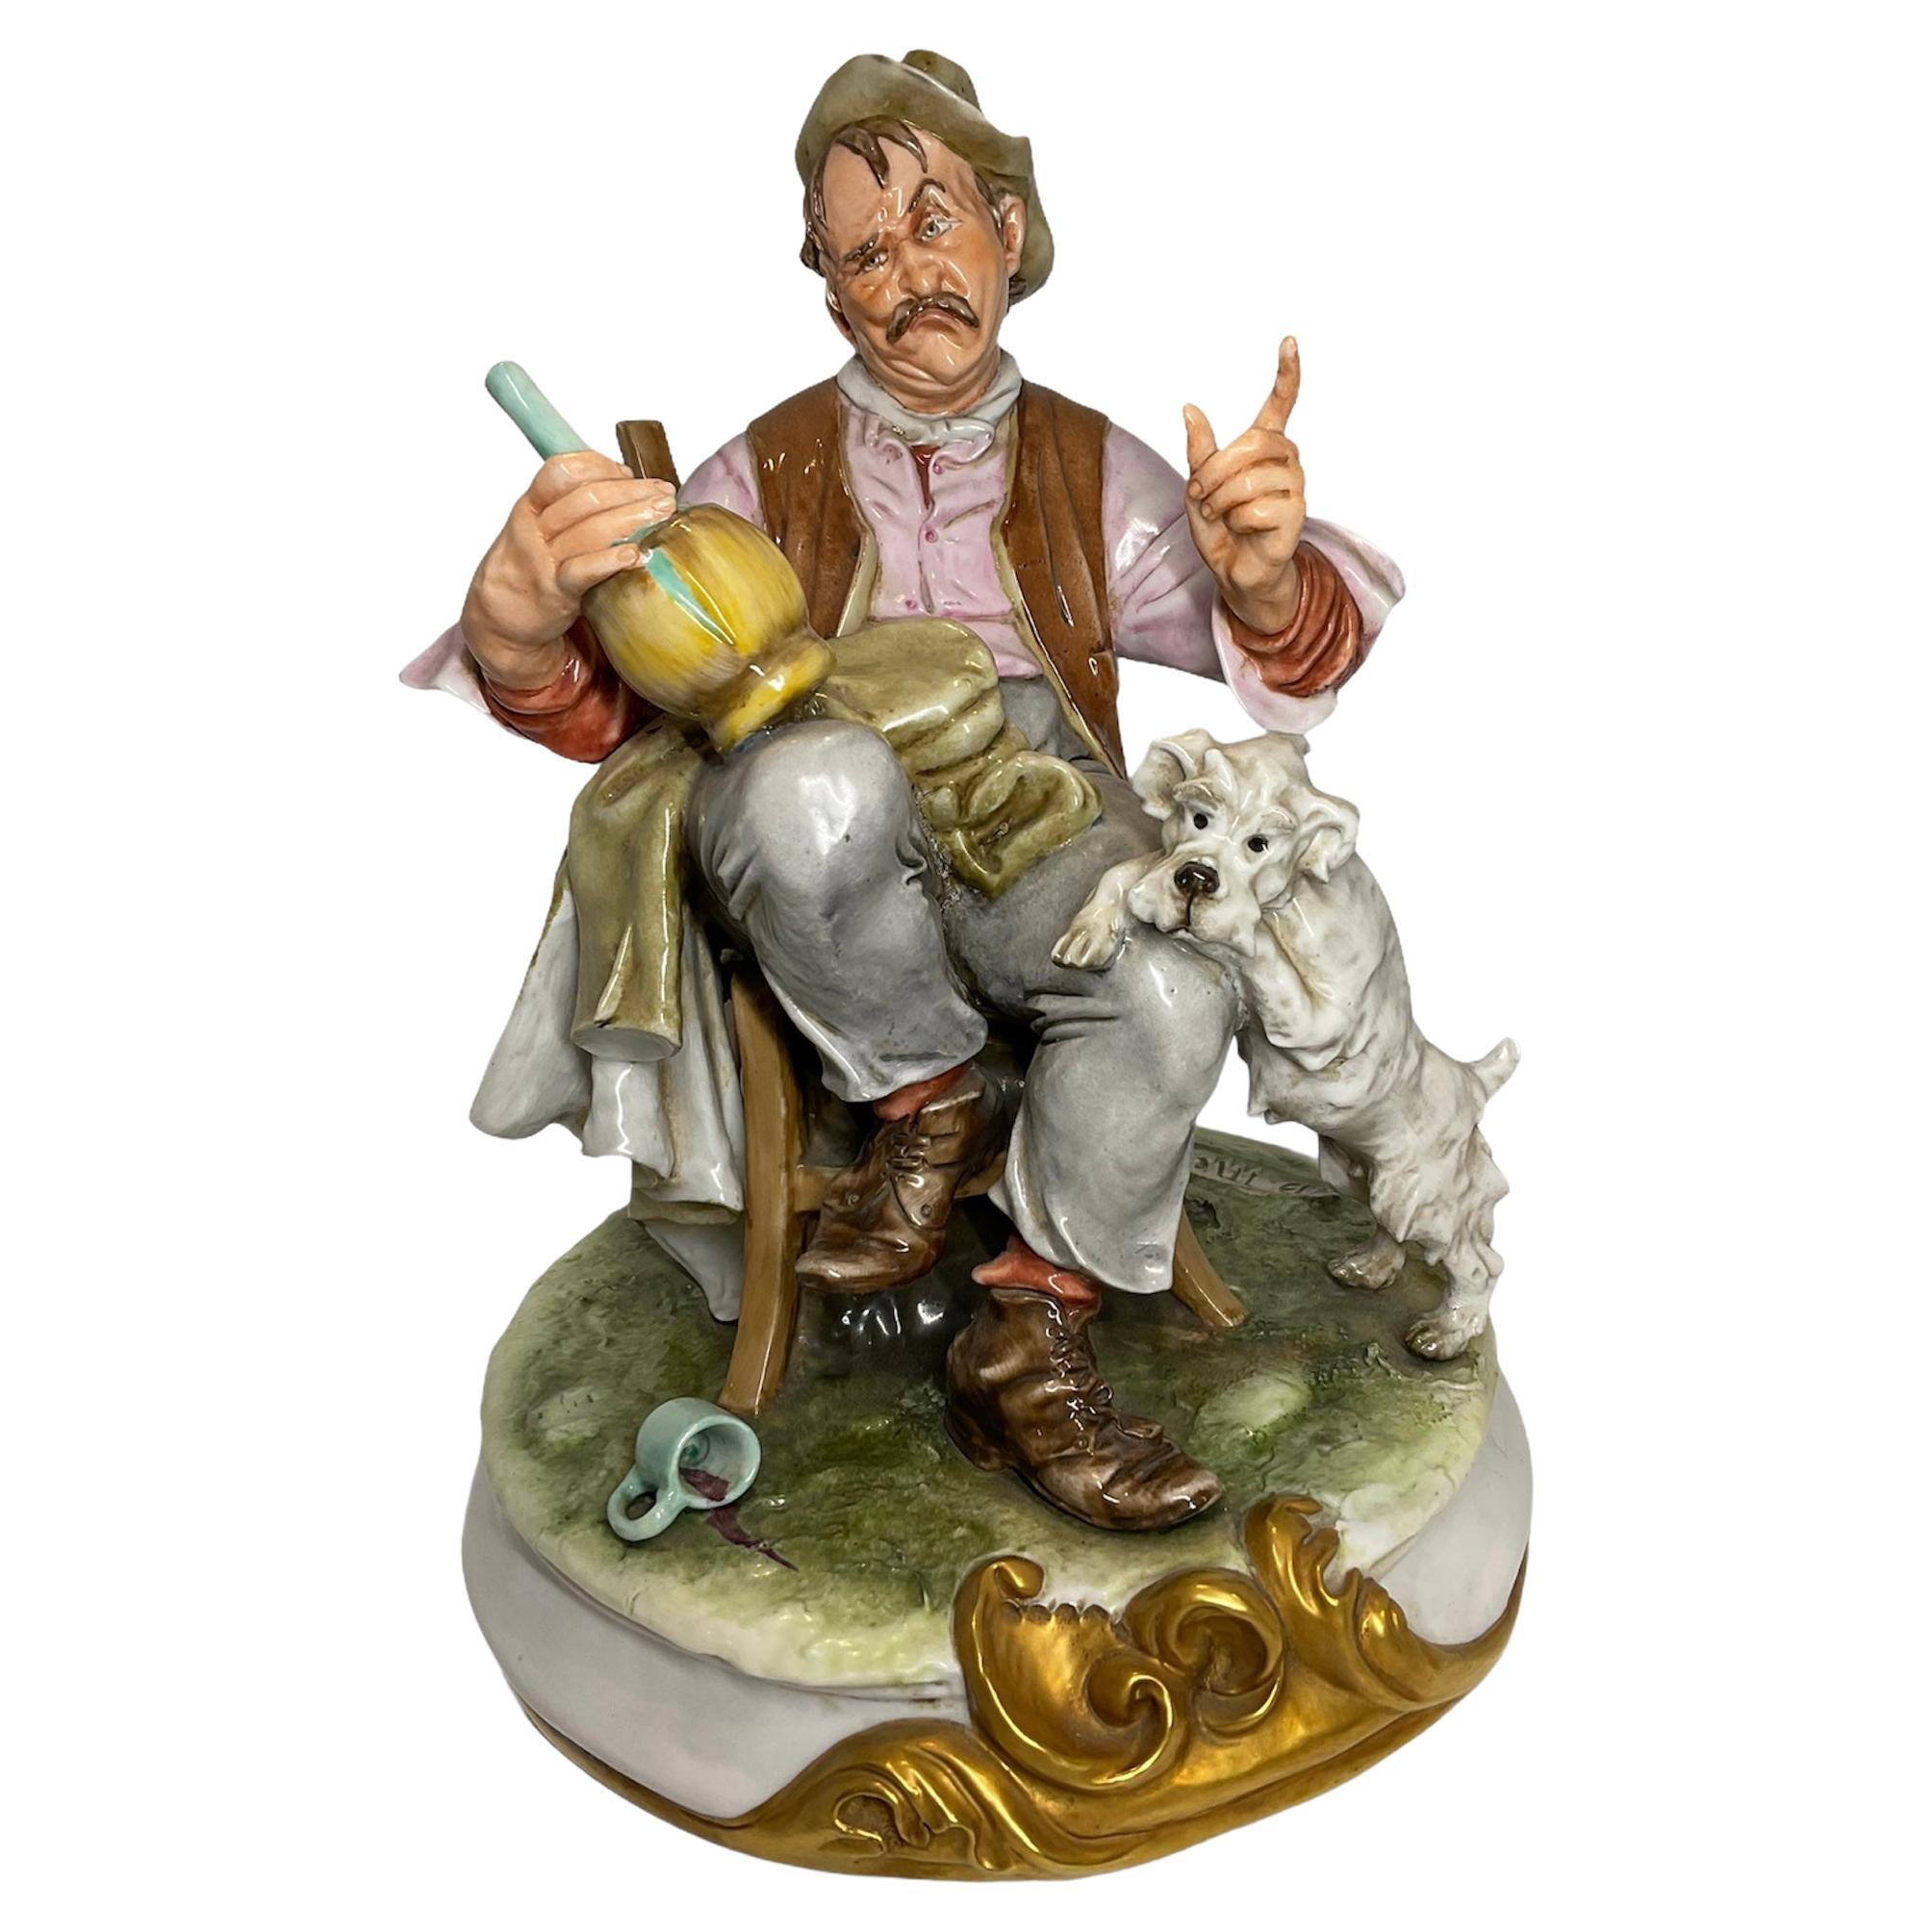 Capodimonte Porcelain Sculpture of a Drunk Man and His Dog